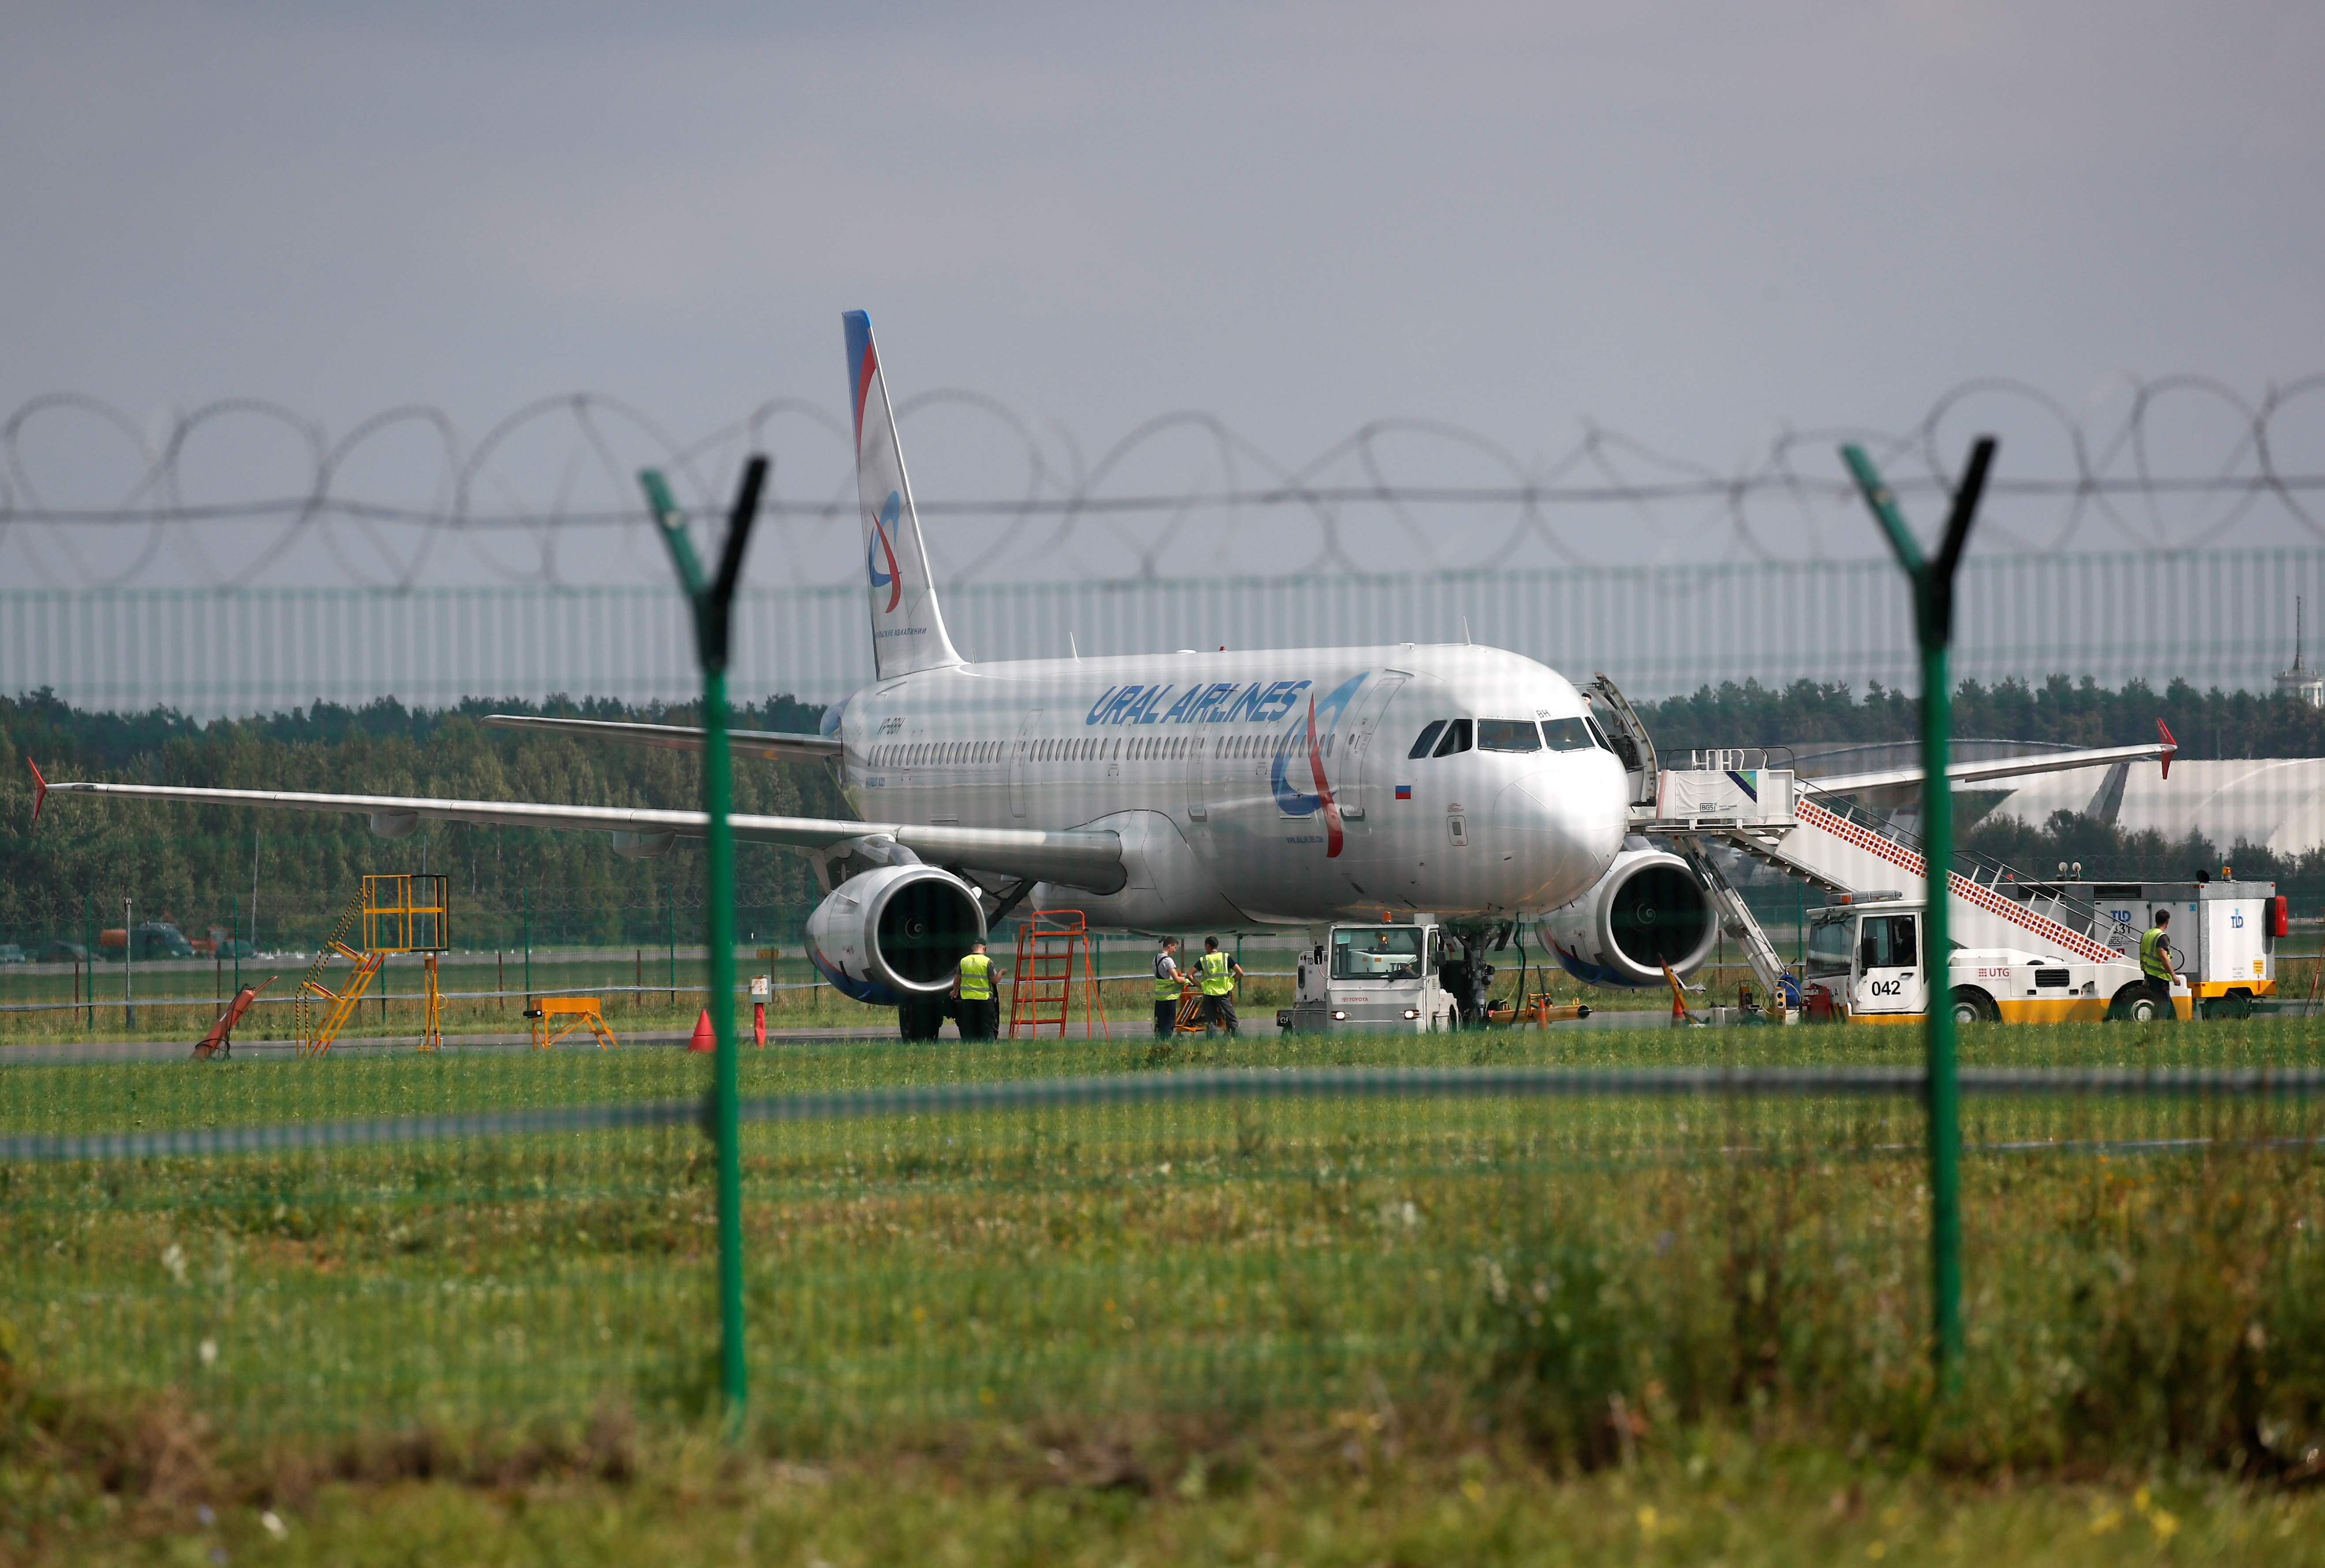 A view shows a Ural Airlines passenger plane on the tarmac of Zhukovsky International Airport in Moscow Region